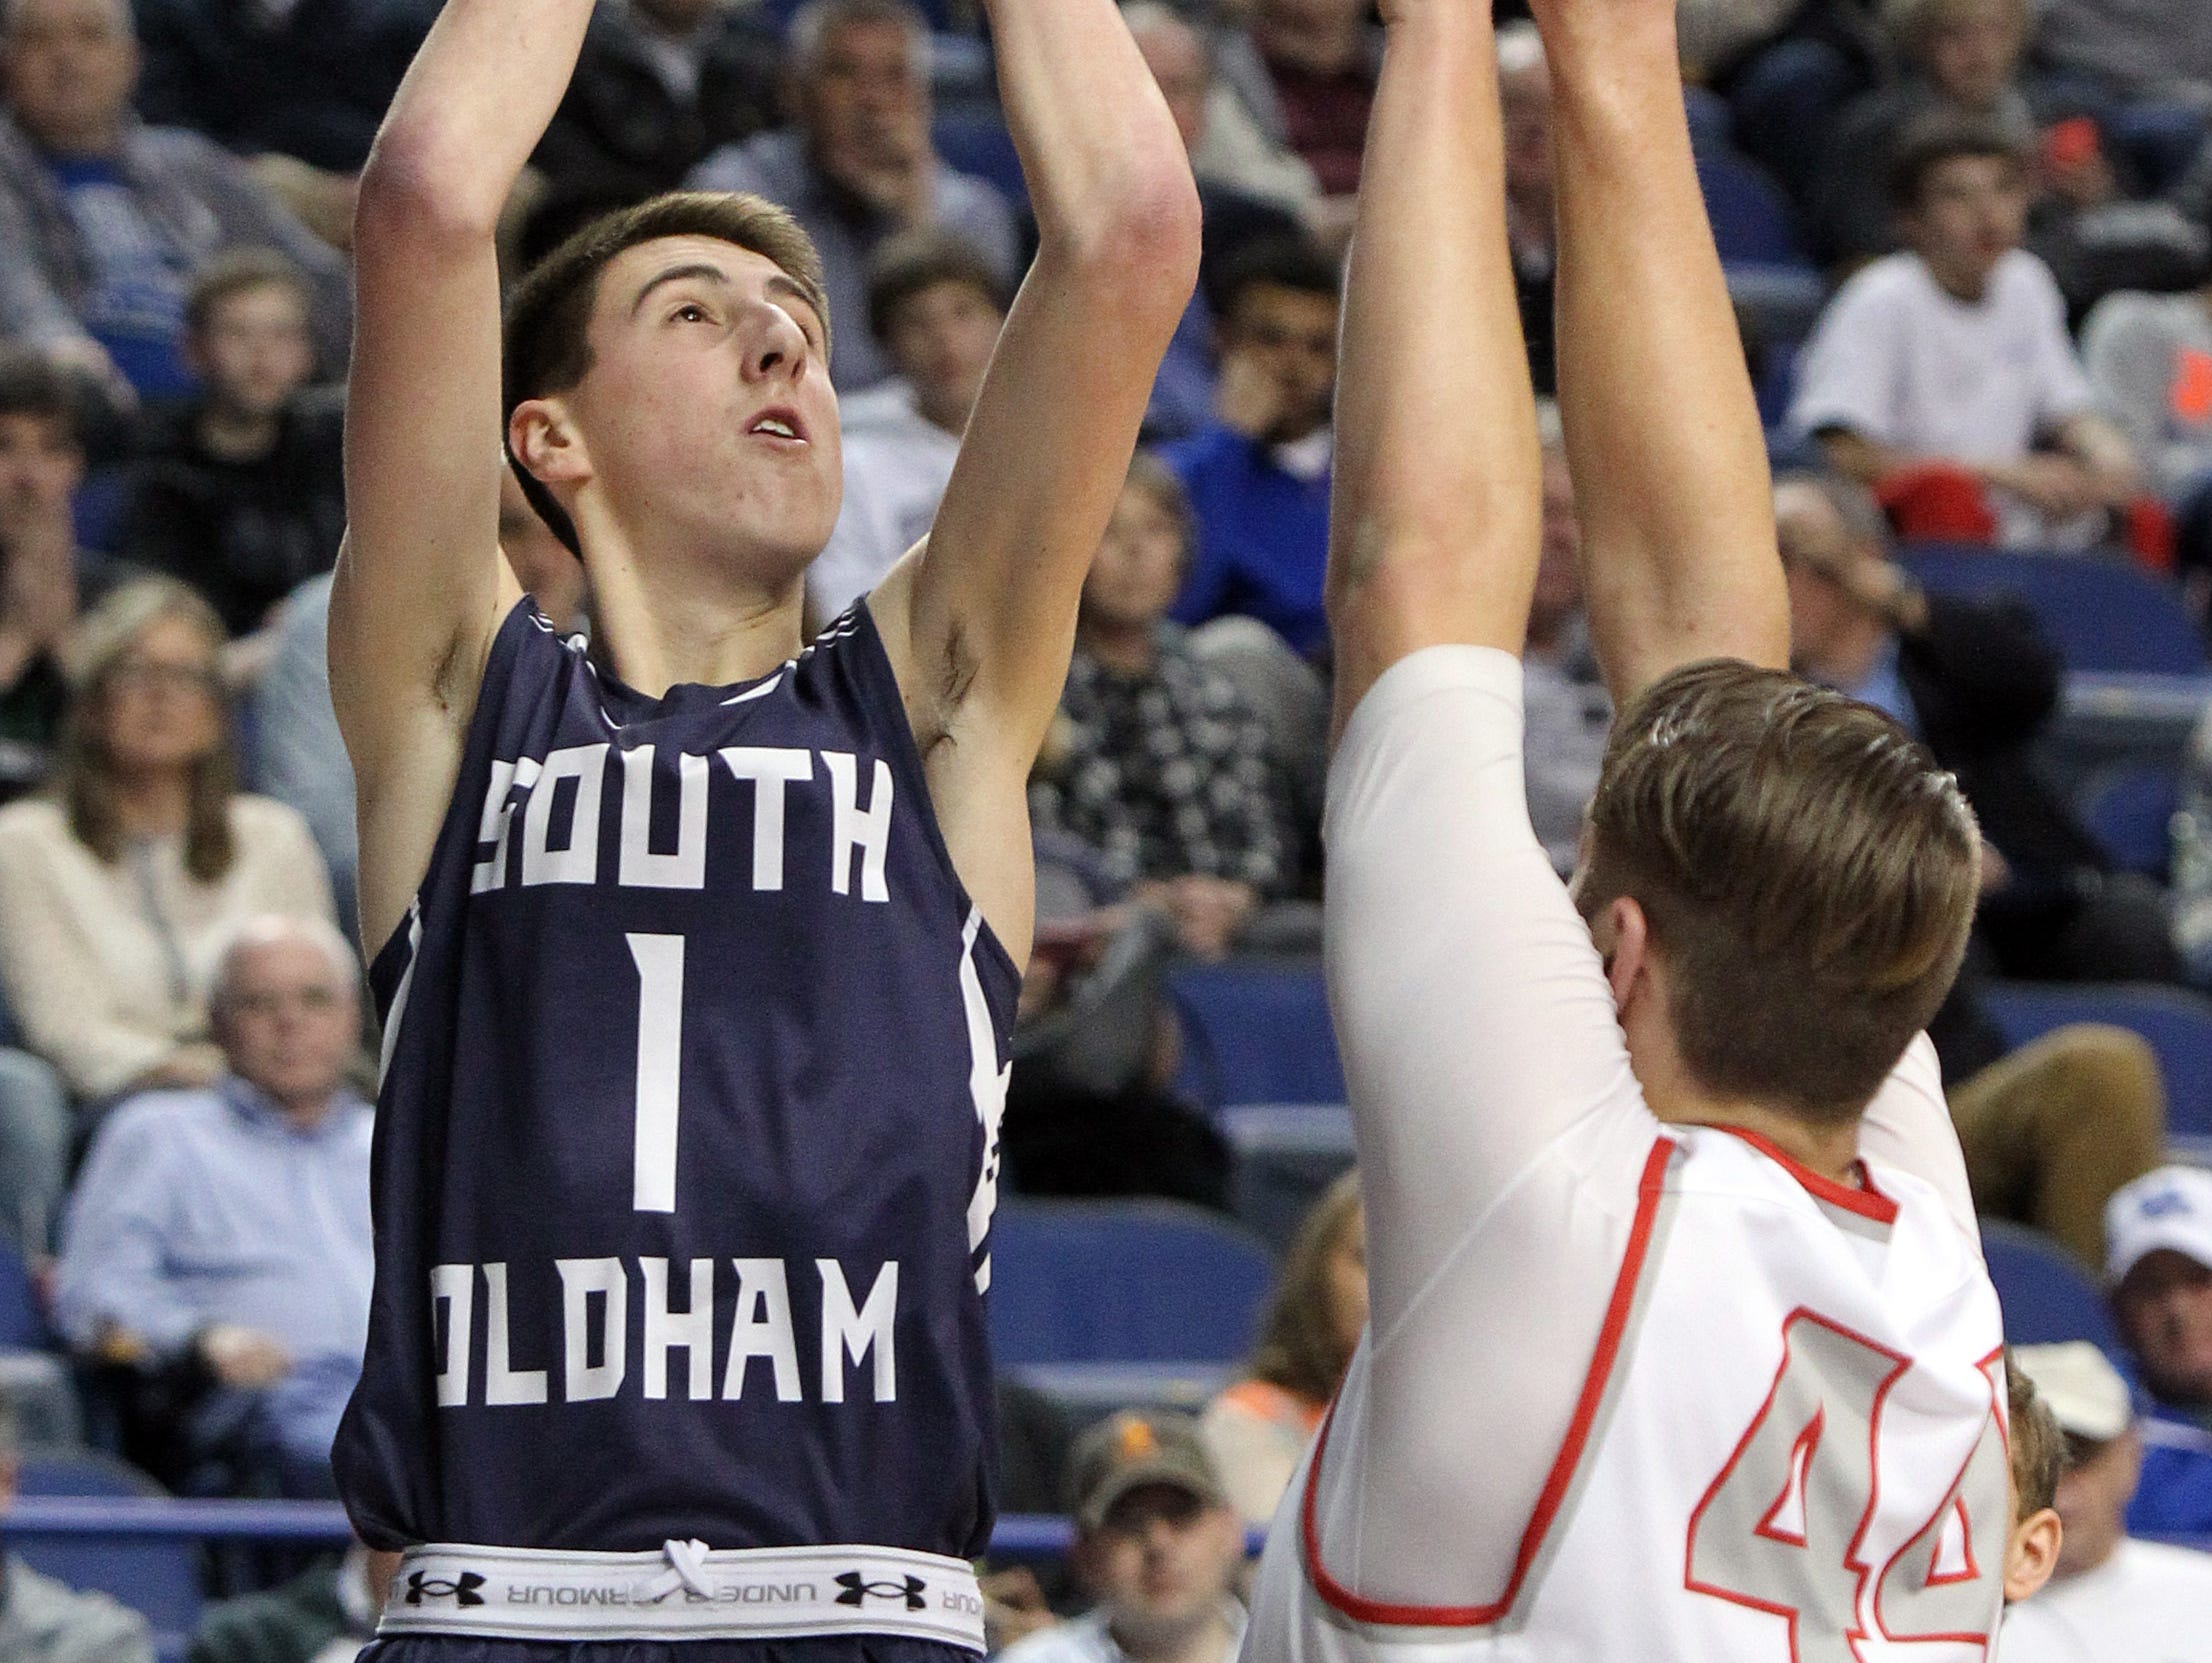 South Oldham's Devin Young shoots near South Laurel's Caleb Taylor during their quarter-final round of the Sweet 16 in Lexington. March 18, 2016